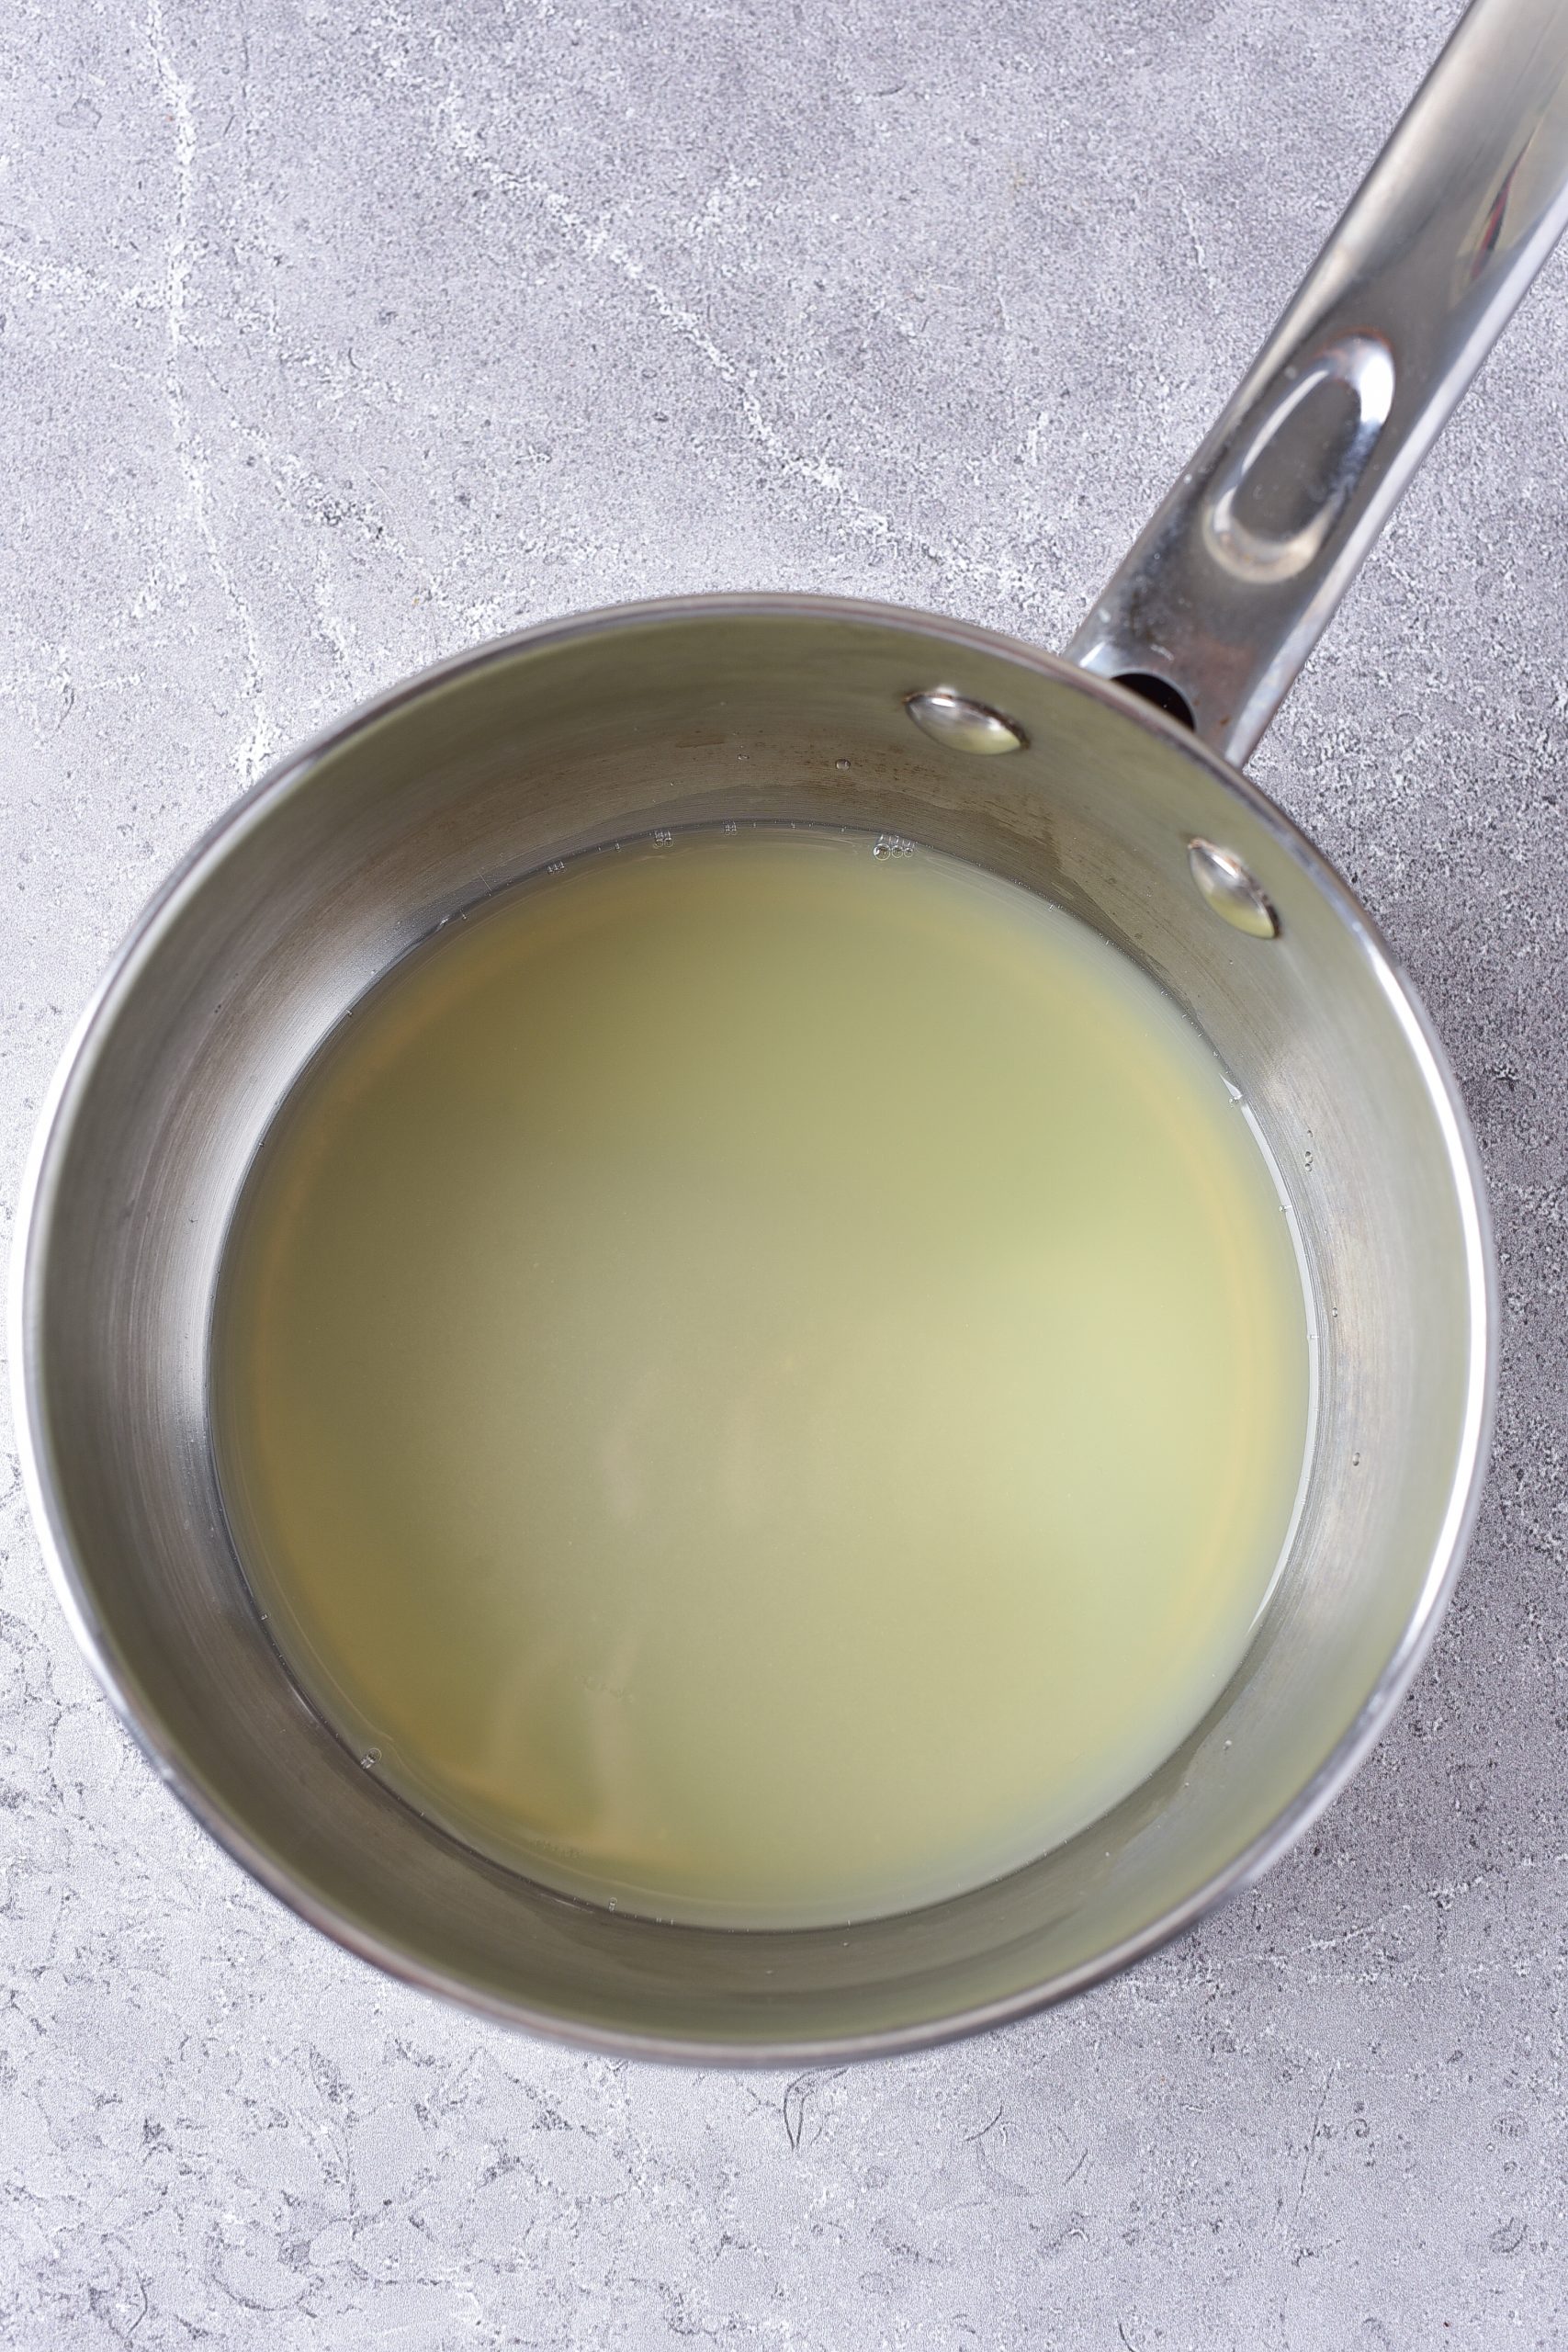 Place the ingredients for the syrup into a saucepan over medium heat. Simmer until the sugar has melted. 